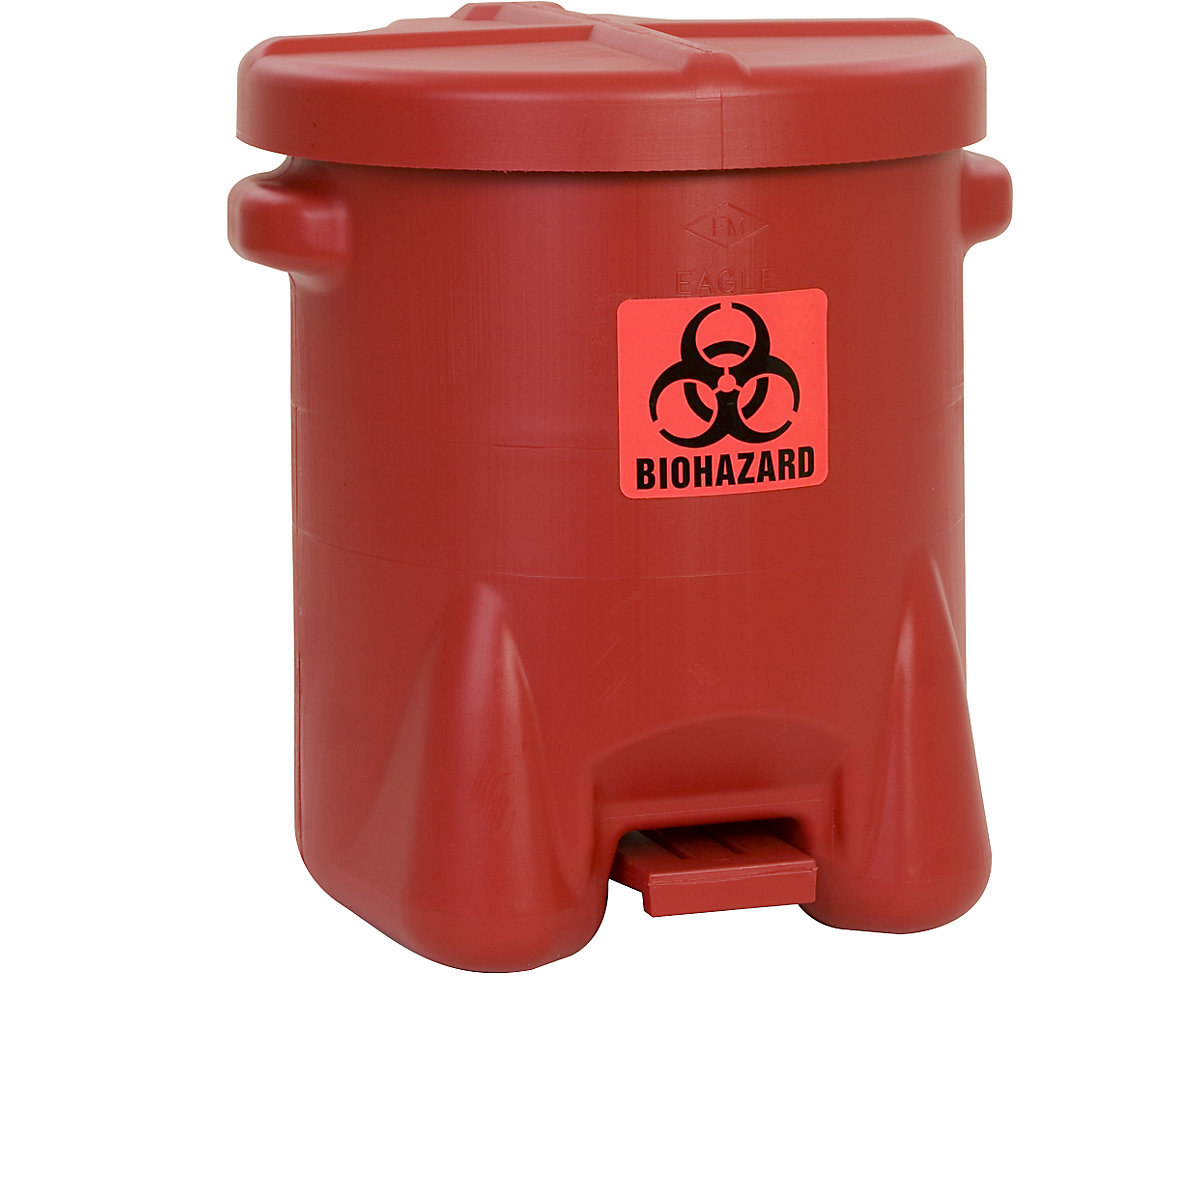 Justrite – PE safety disposal can for biohazardous waste